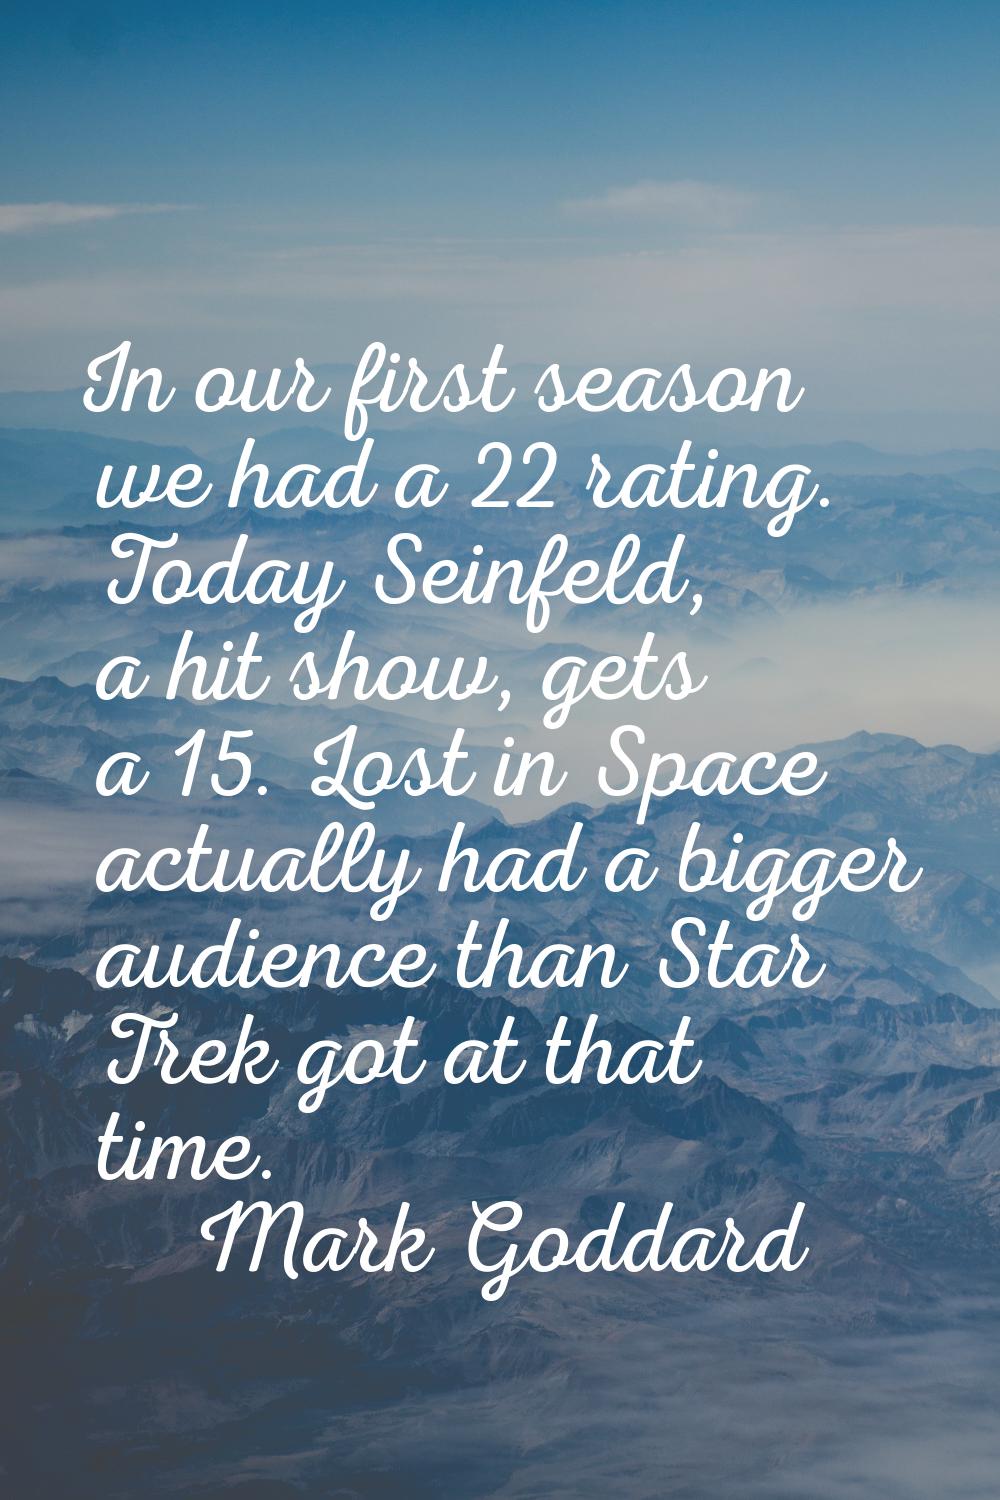 In our first season we had a 22 rating. Today Seinfeld, a hit show, gets a 15. Lost in Space actual